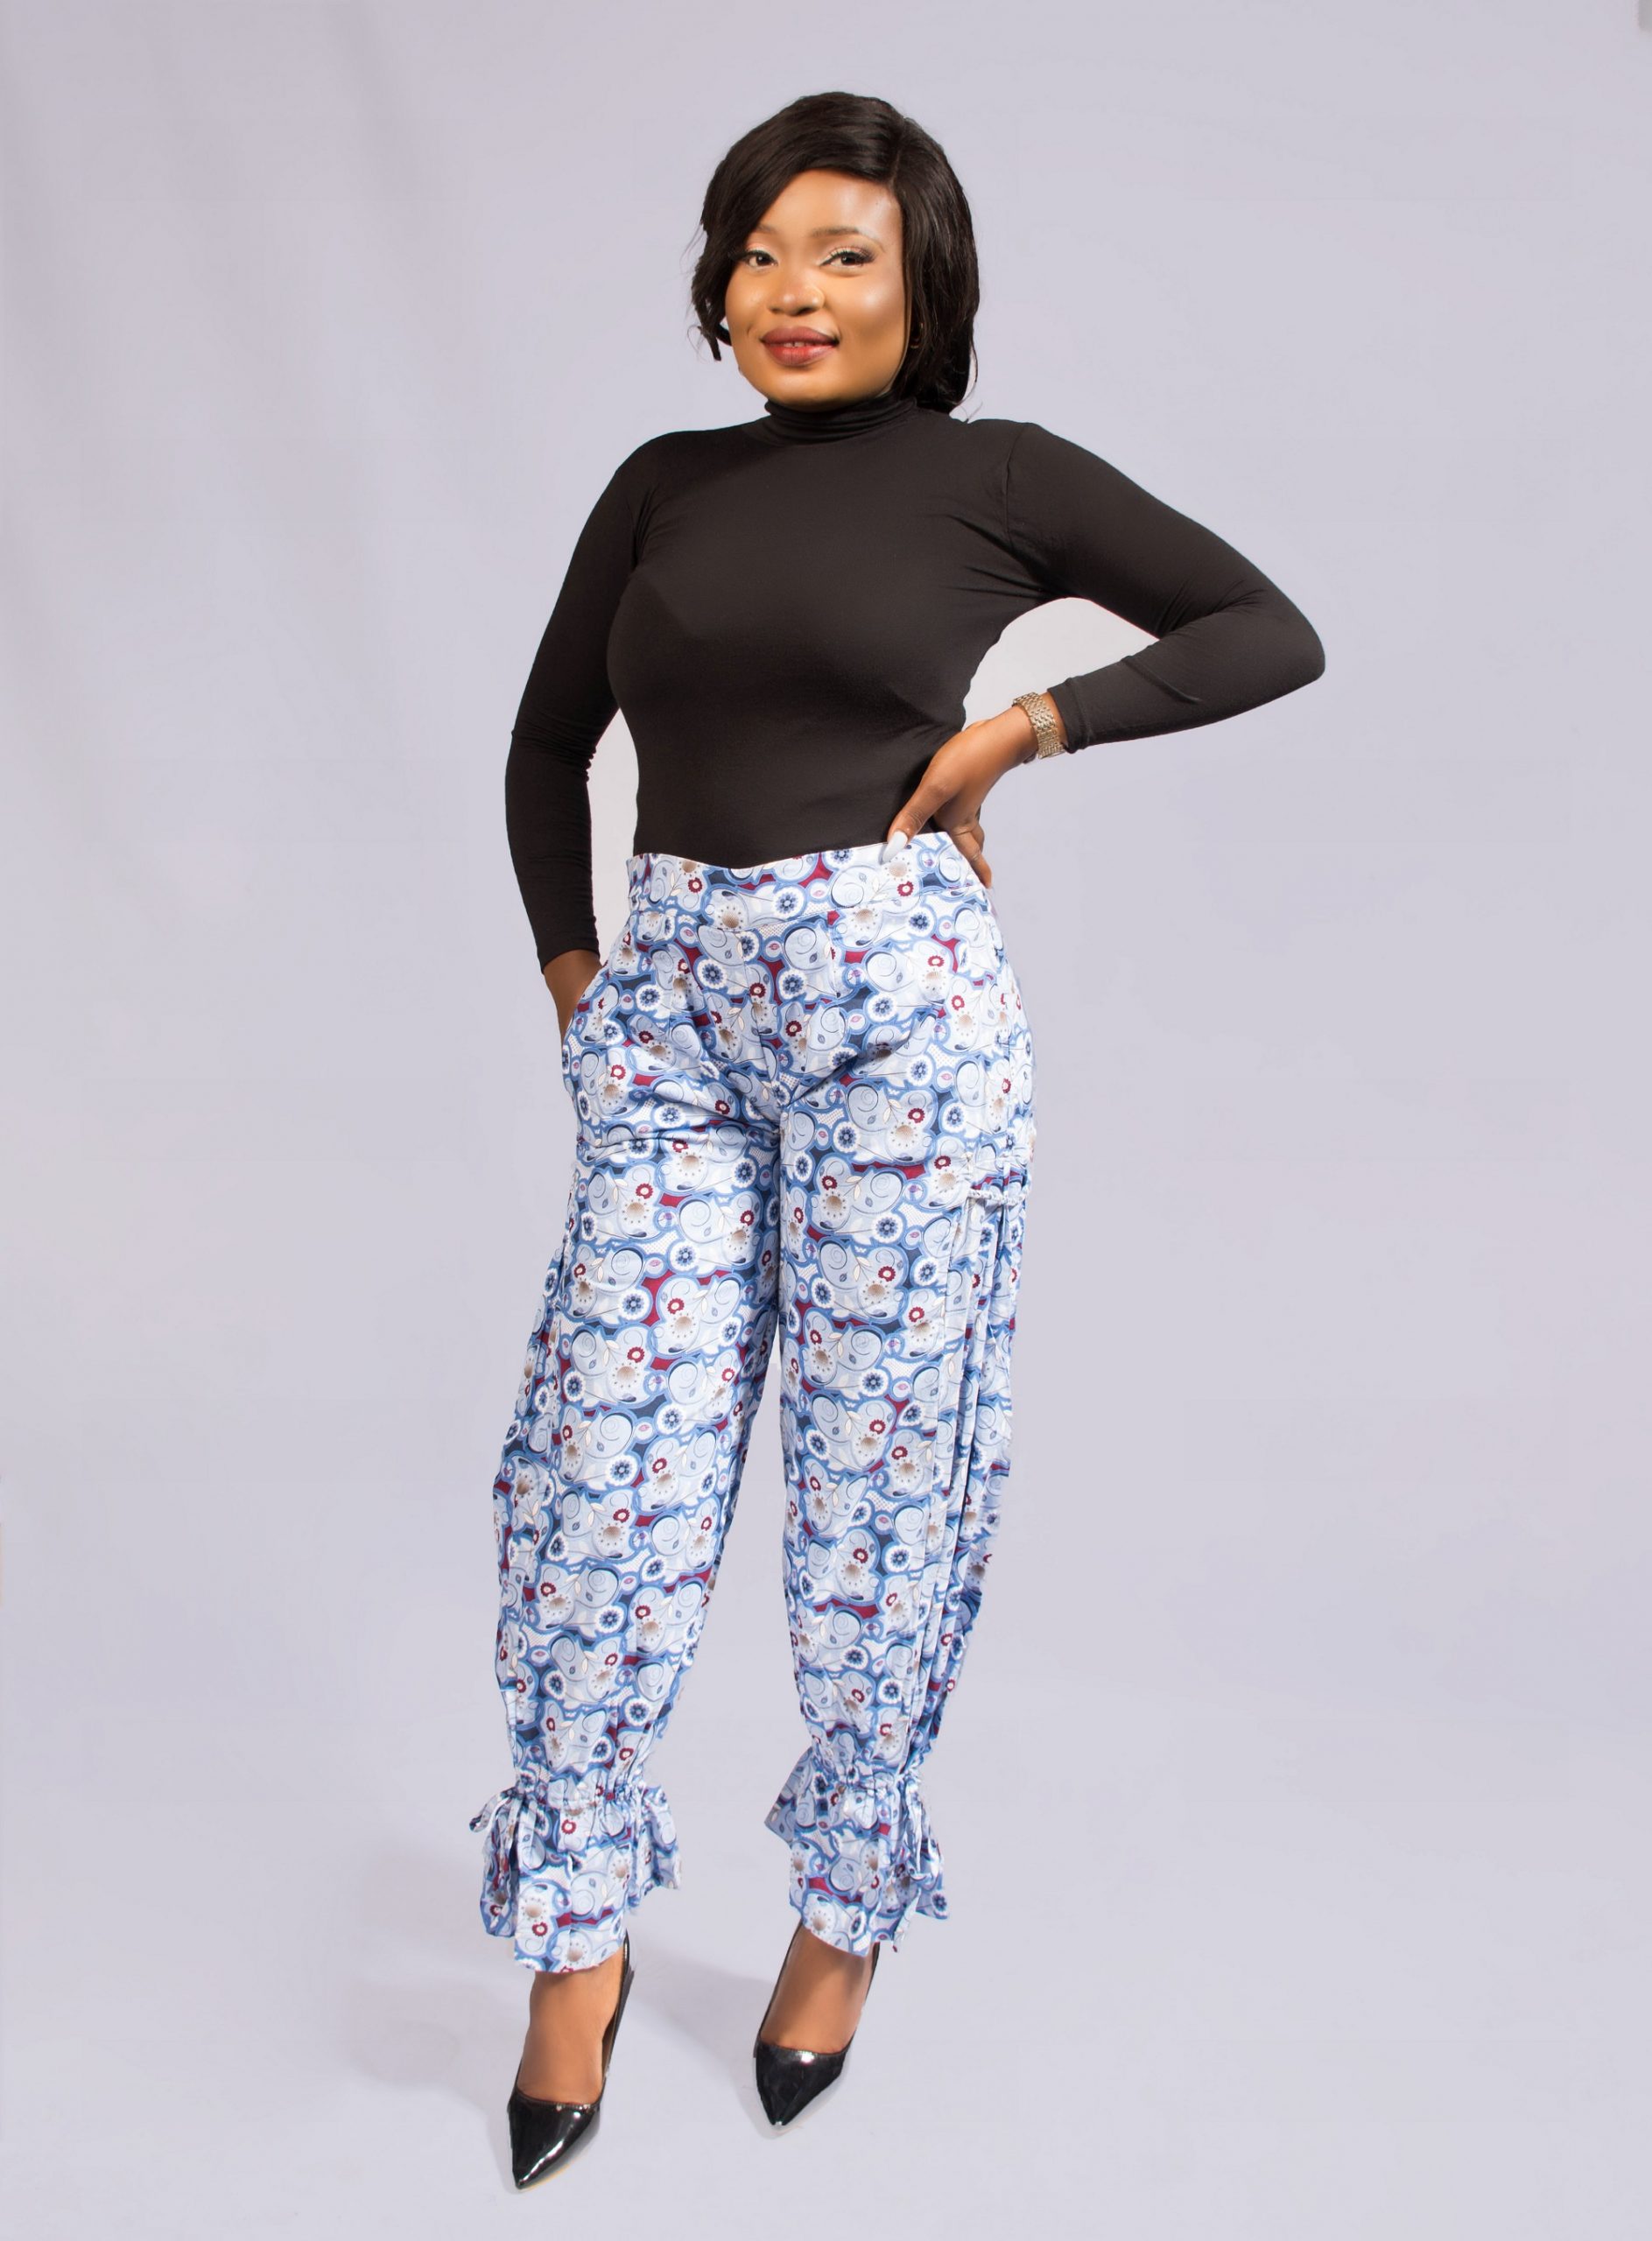 https://www.datinadesigns-tibile.com.ng/wp-content/uploads/2021/07/Carrot-Trouser-2-scaled.jpg